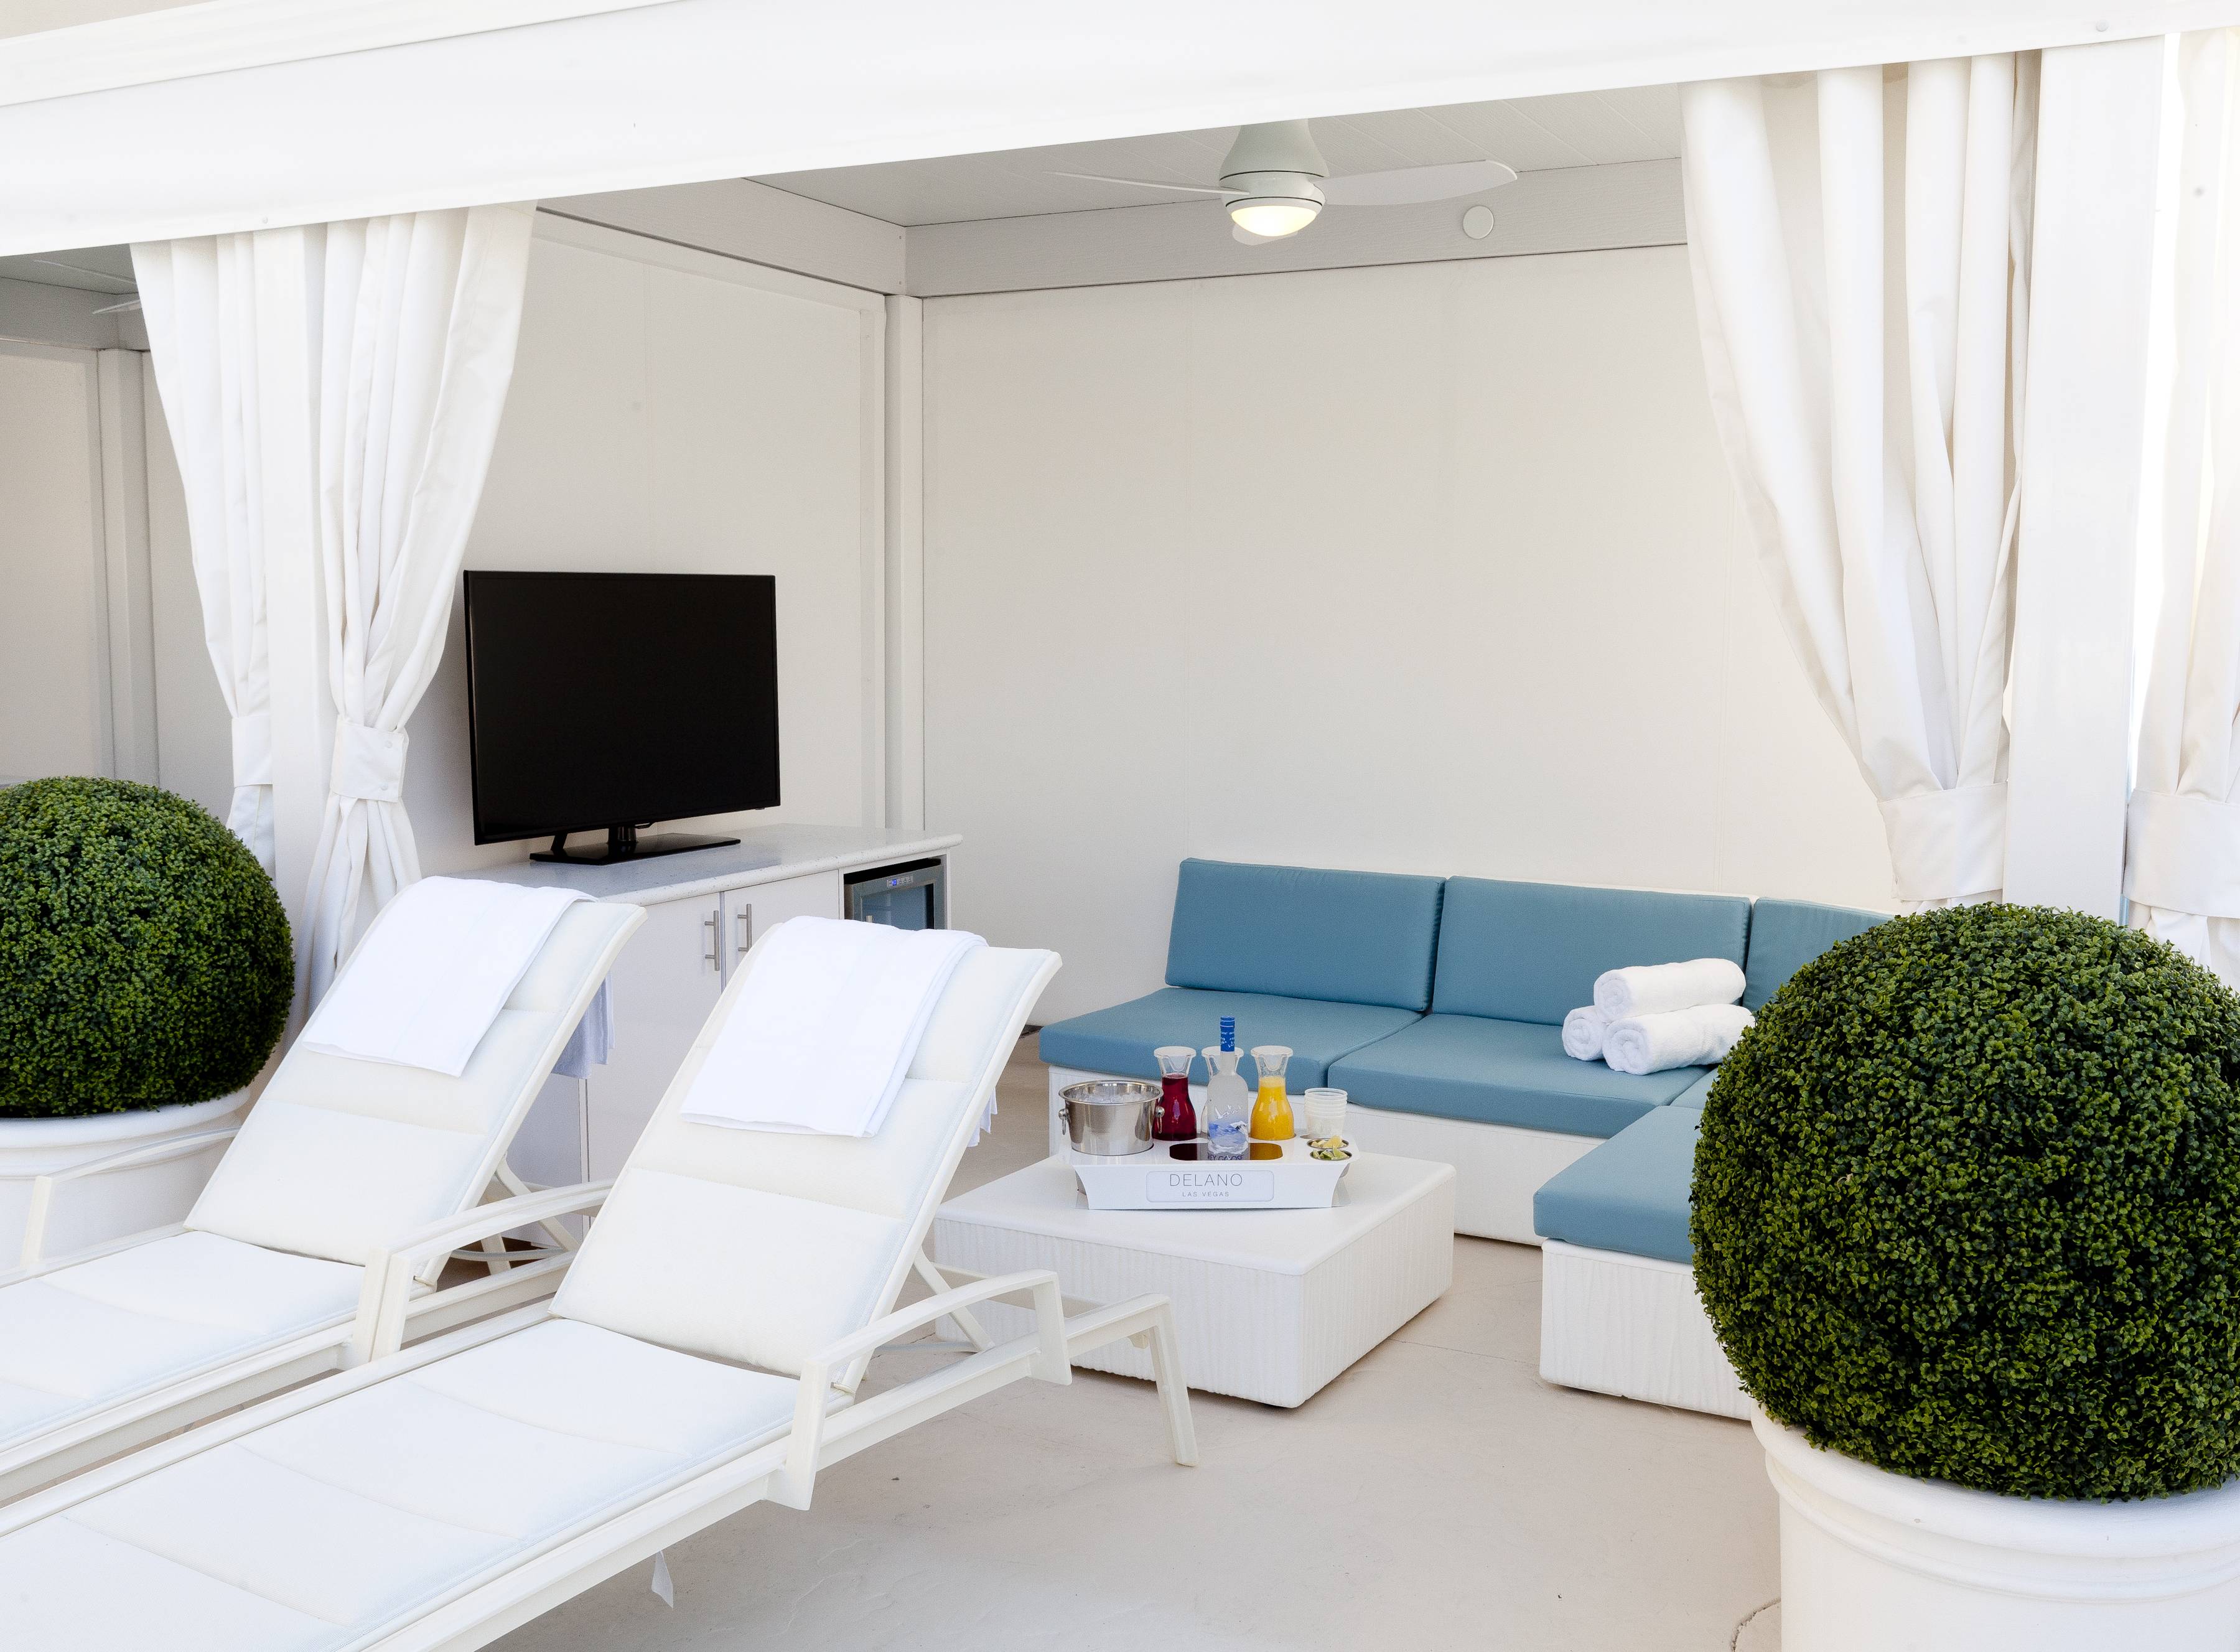 Delano Pool, Cabanas & Daybeds, Hours & Info